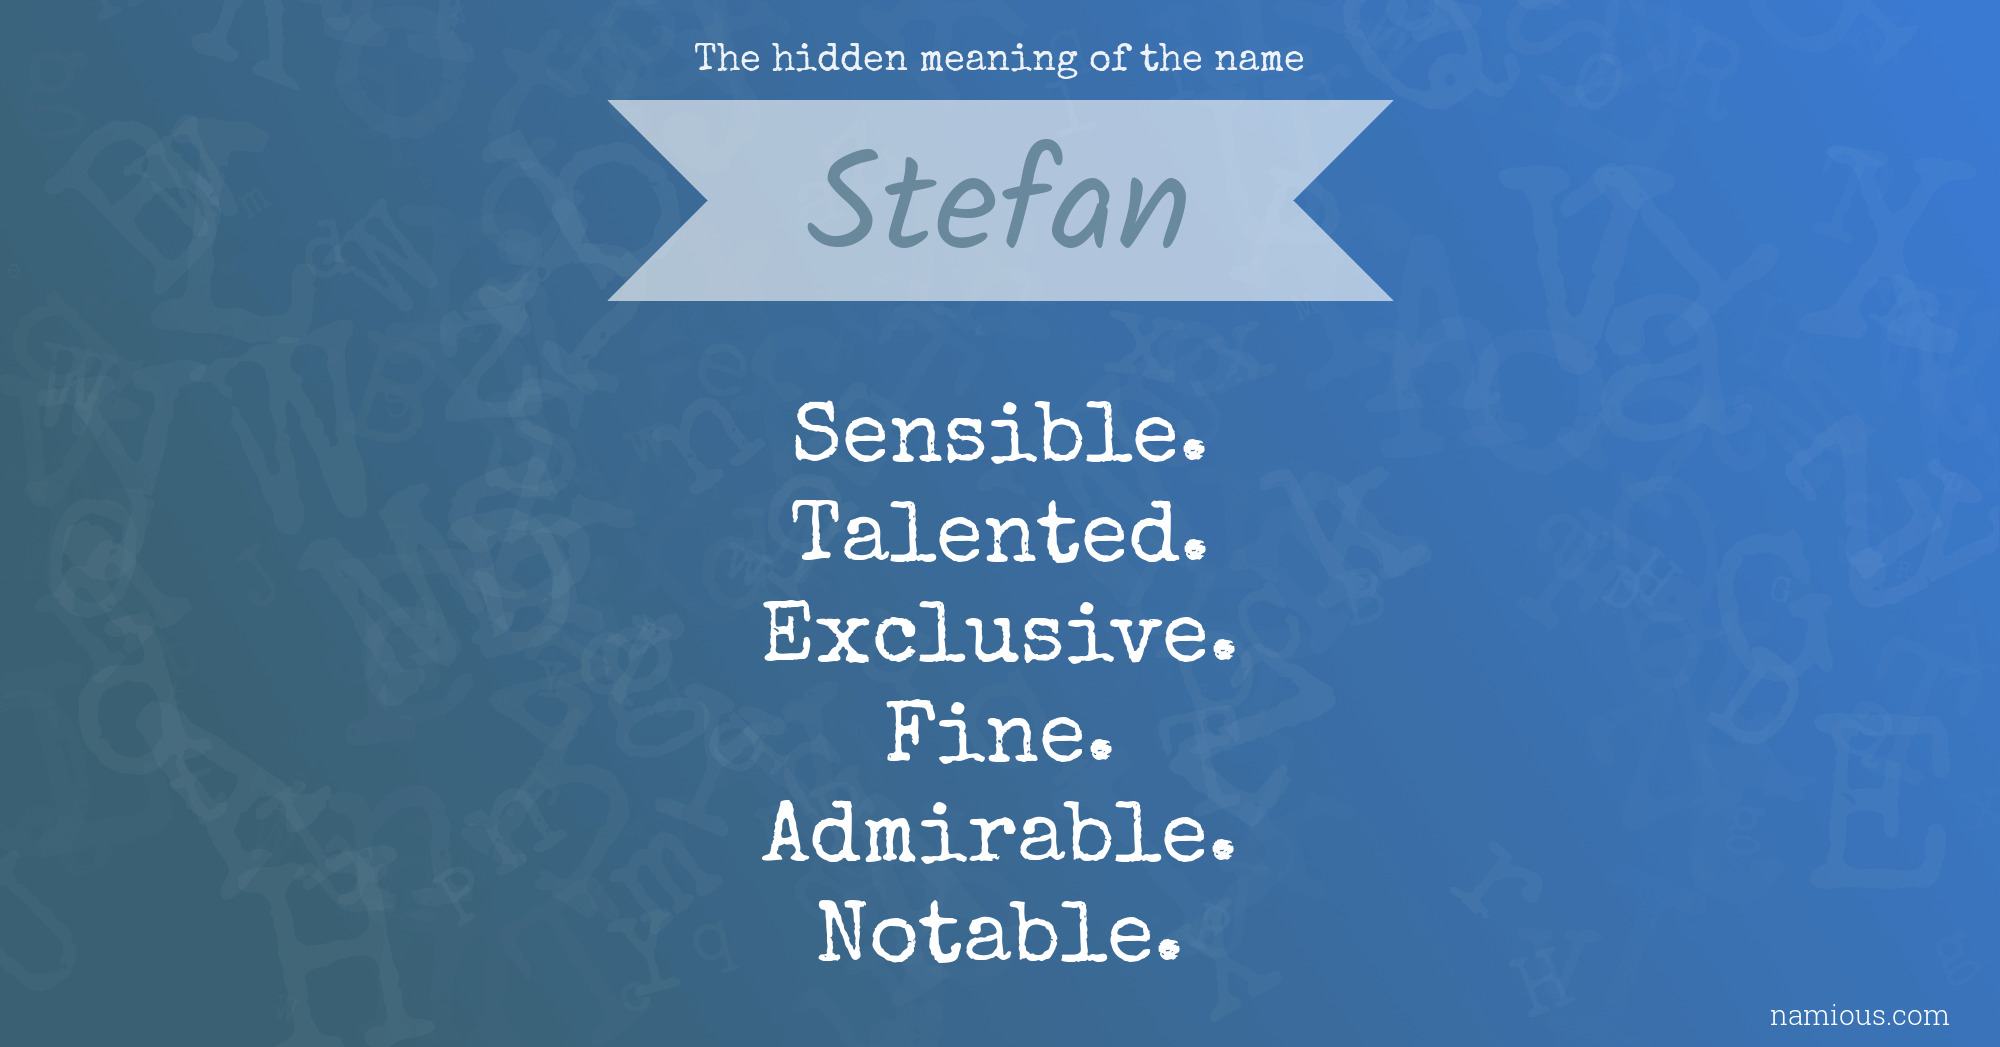 The hidden meaning of the name Stefan